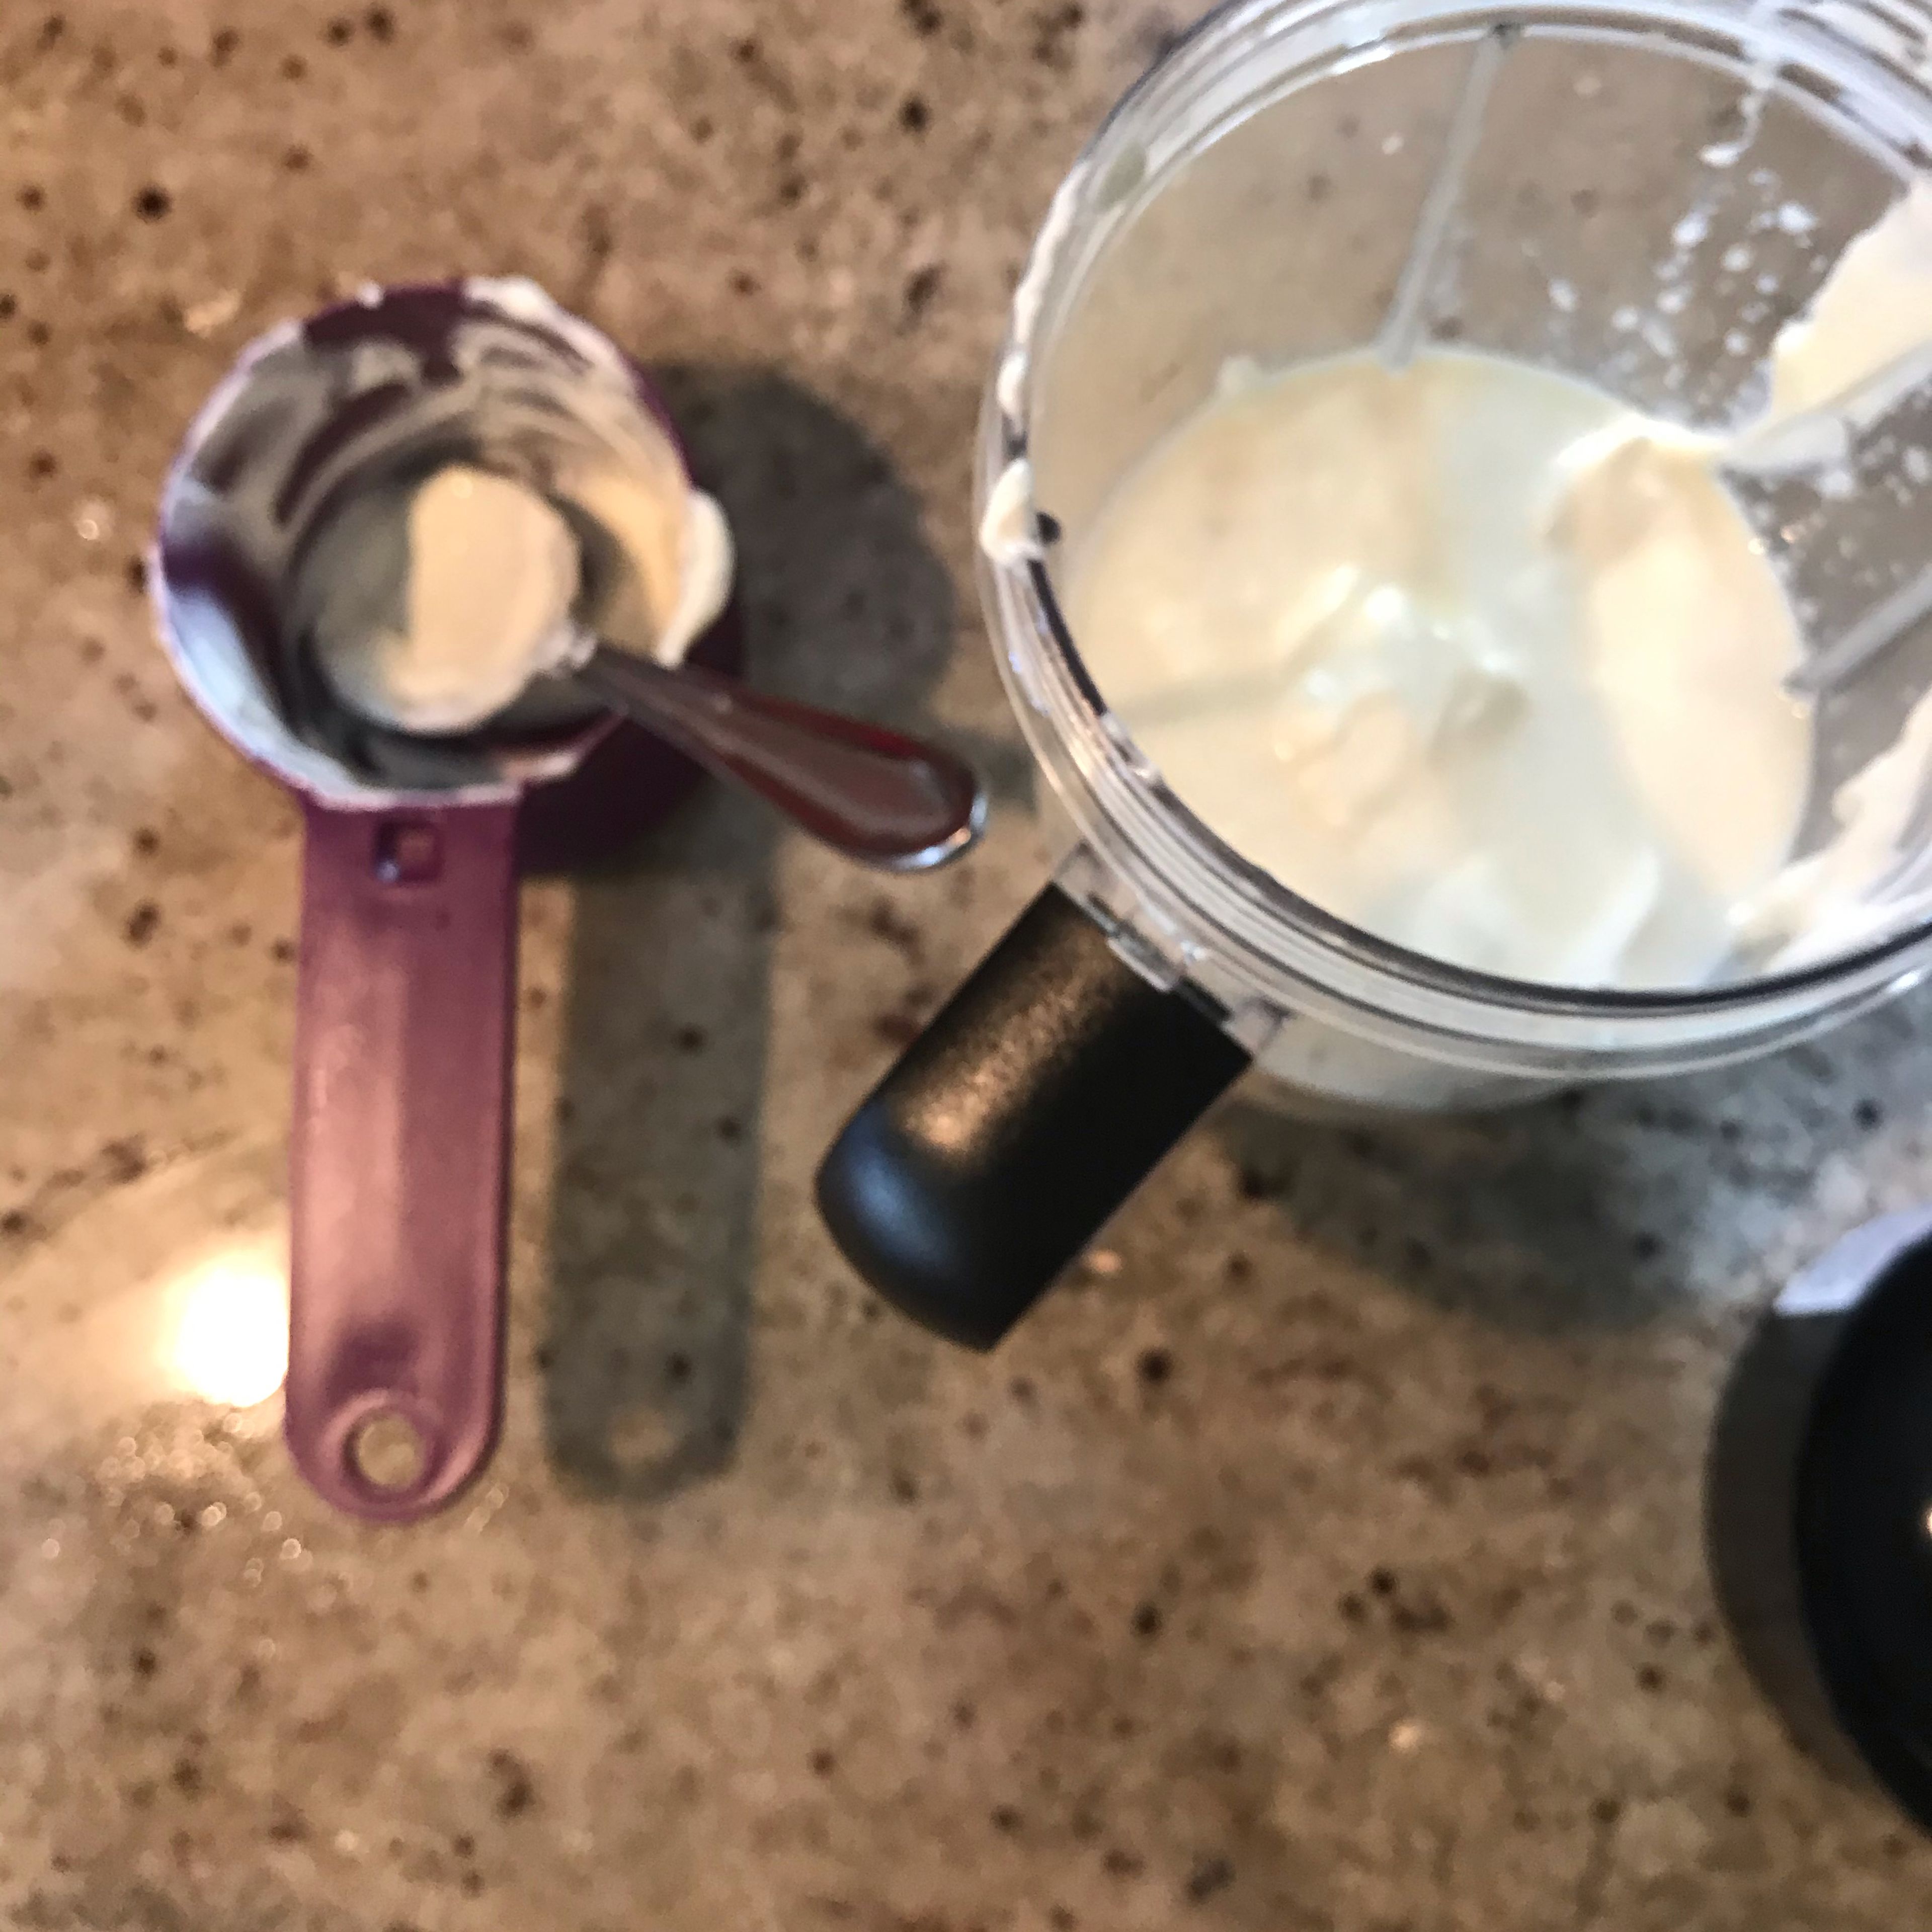 Add in 250 g of yoghurt into your smoothie￼